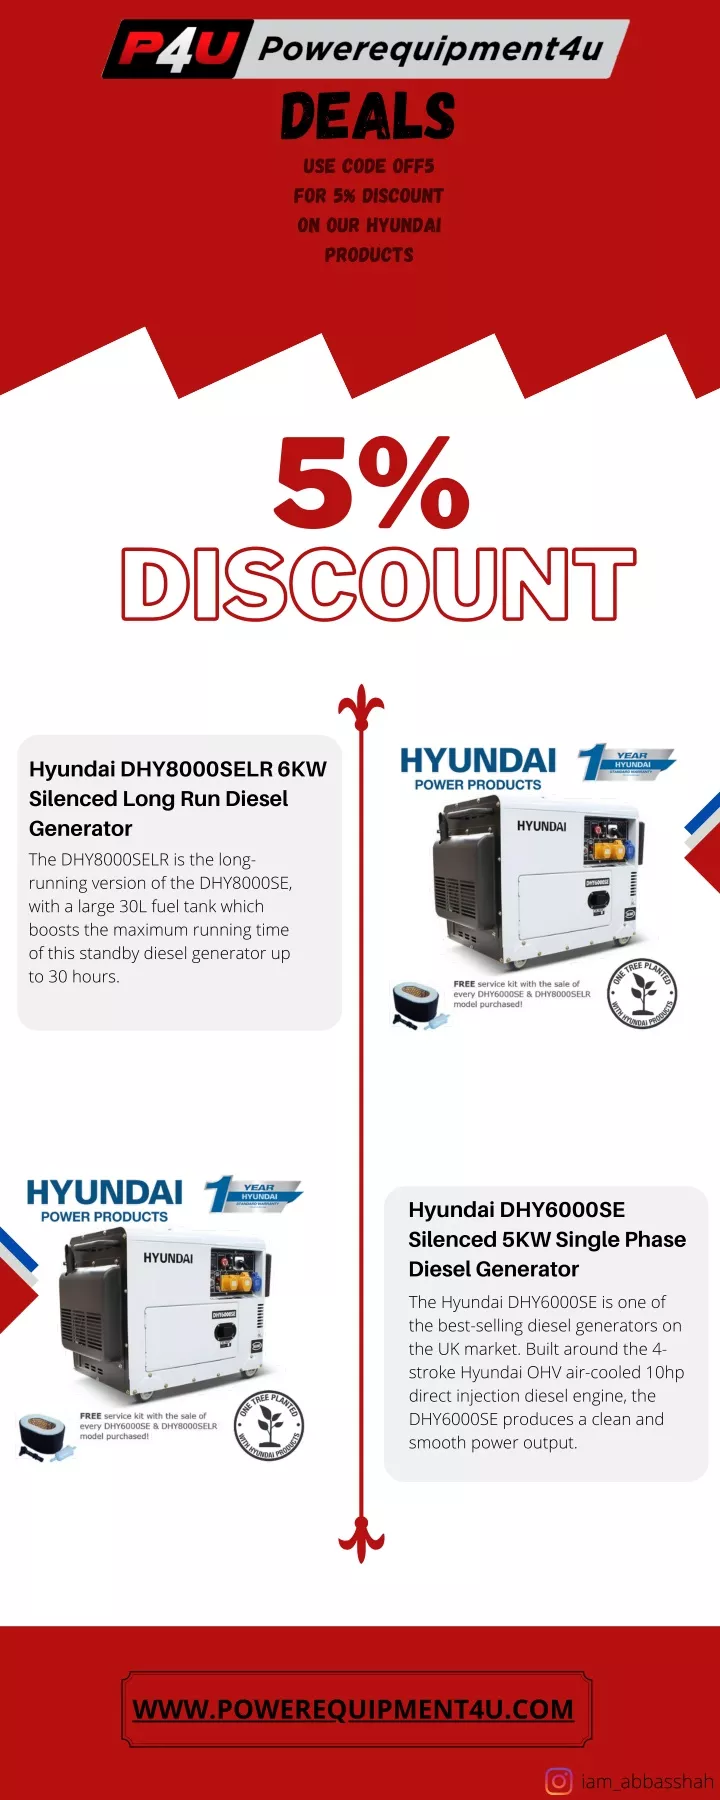 deals use code off5 for 5 discount on our hyundai